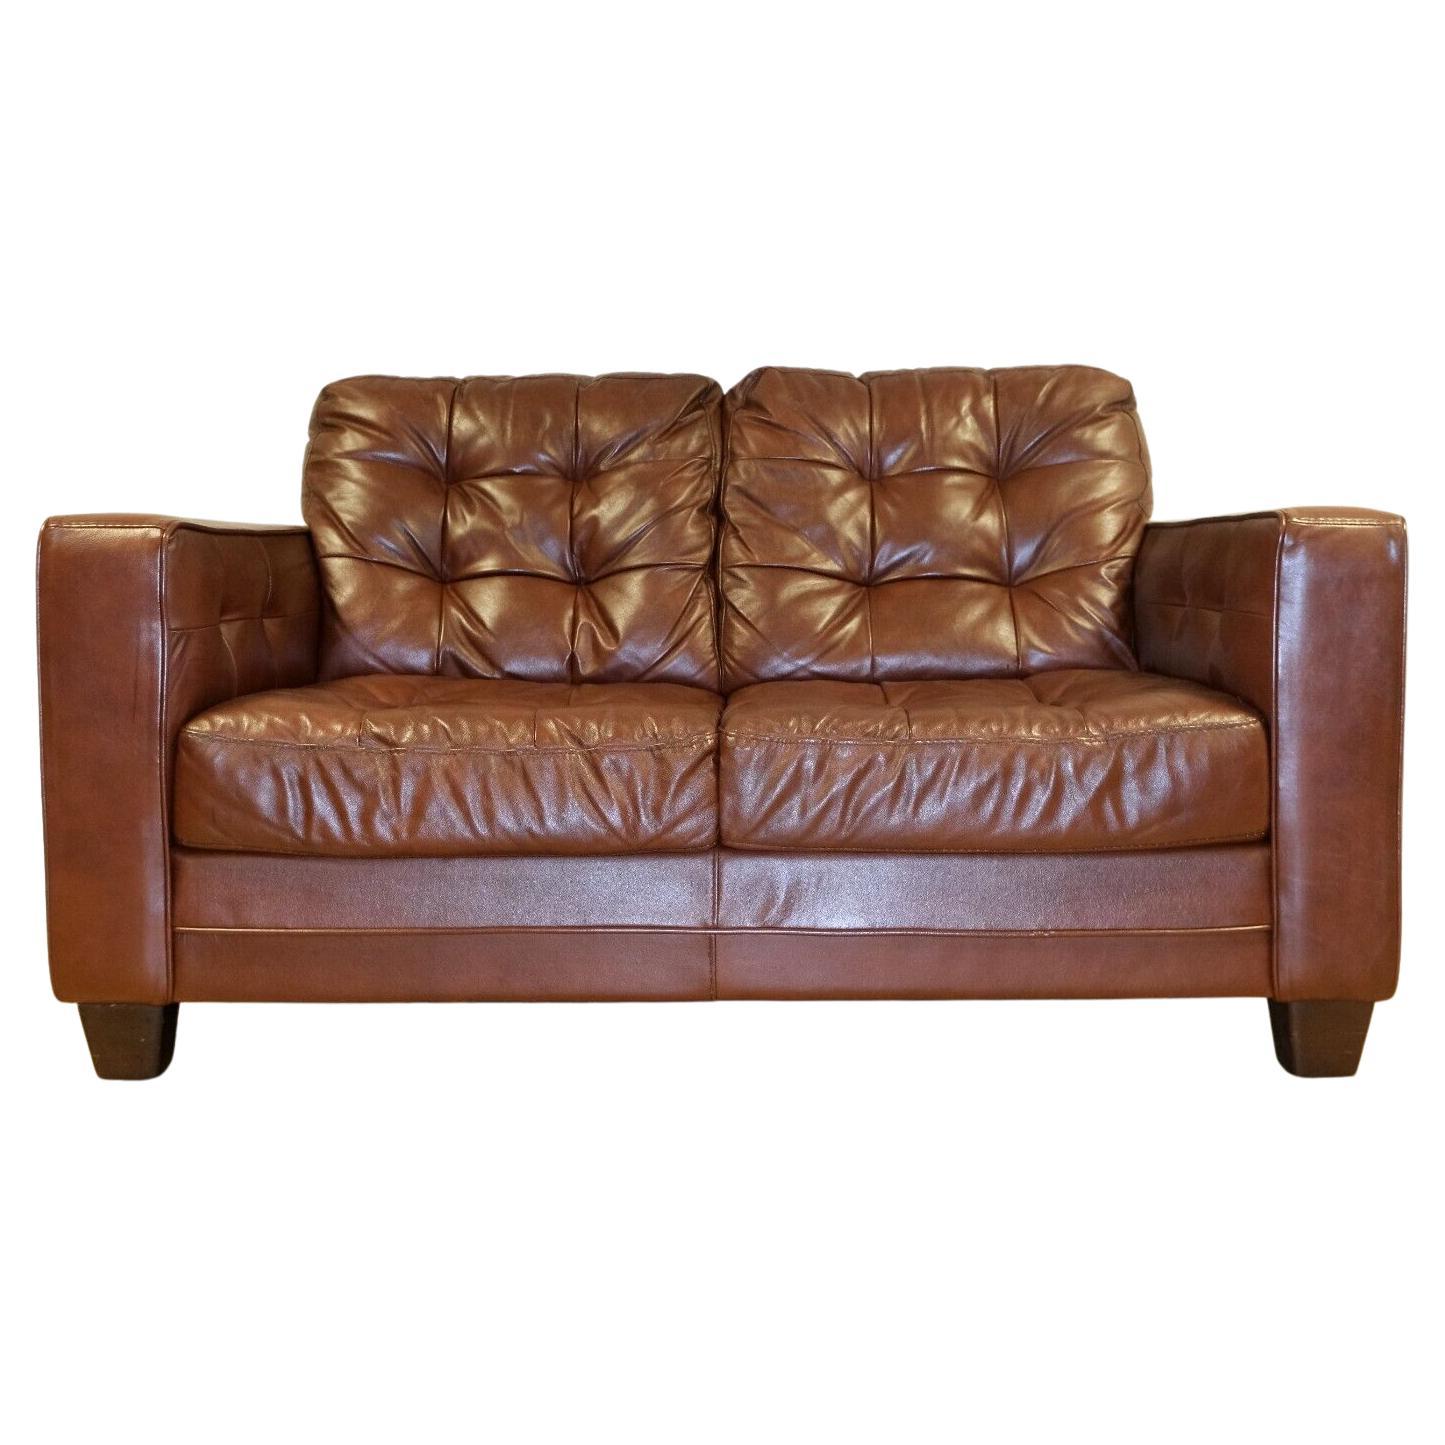 Aged Knoll Style Brown Leather Two Seater Sofa Chesterfield Style Buttoning For Sale